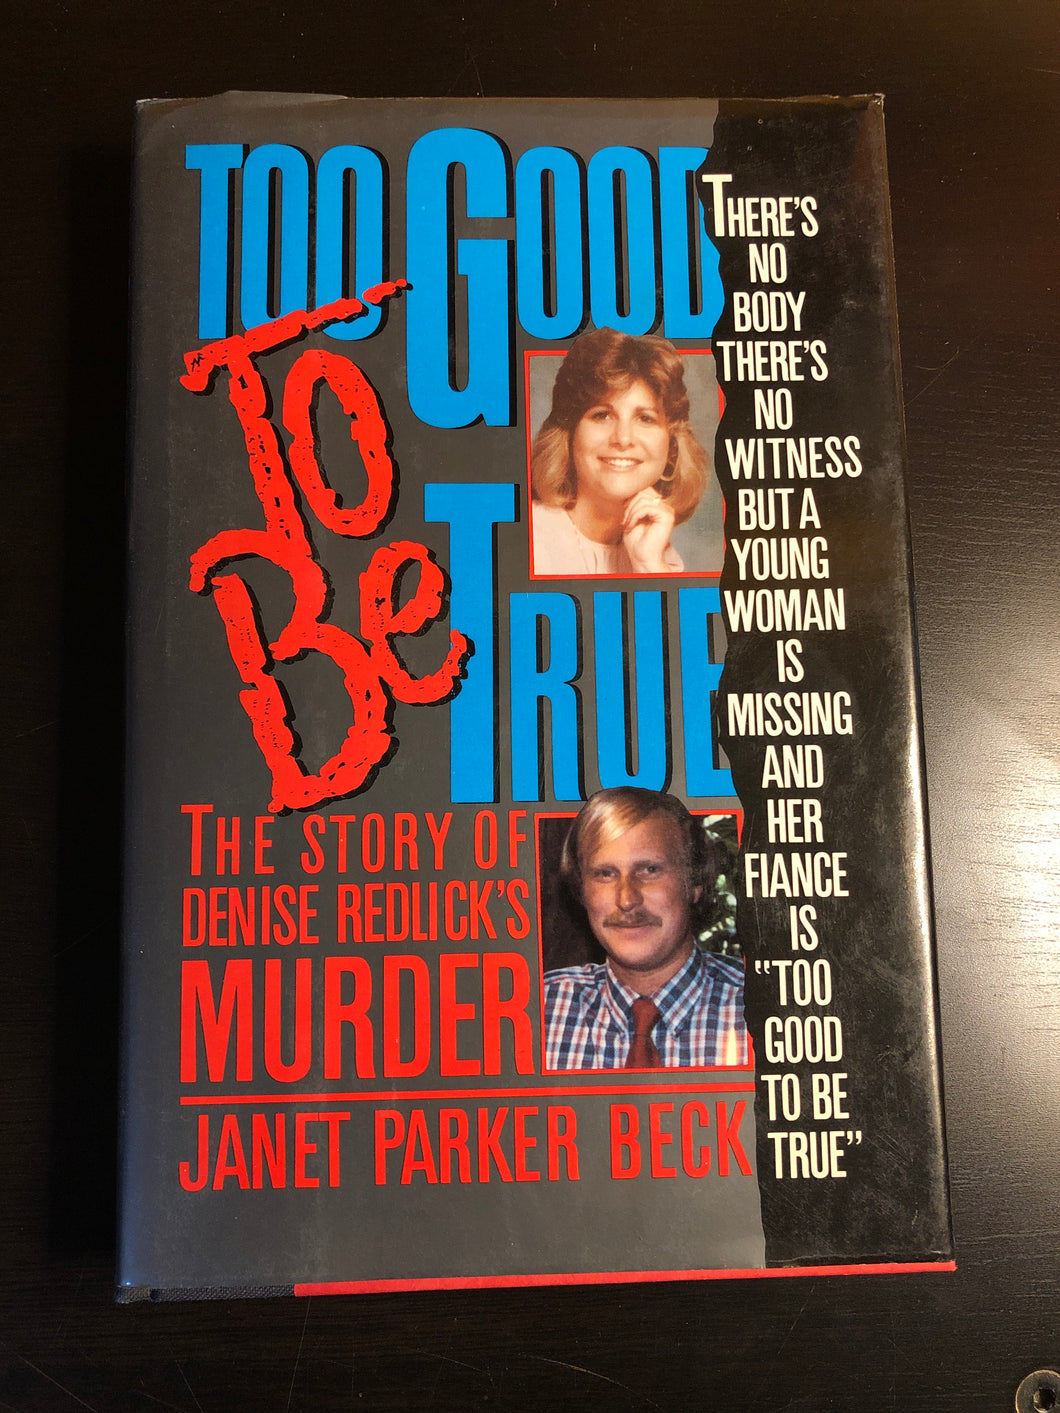 Too Good to be True: The Story of Denise Redlick's Murder